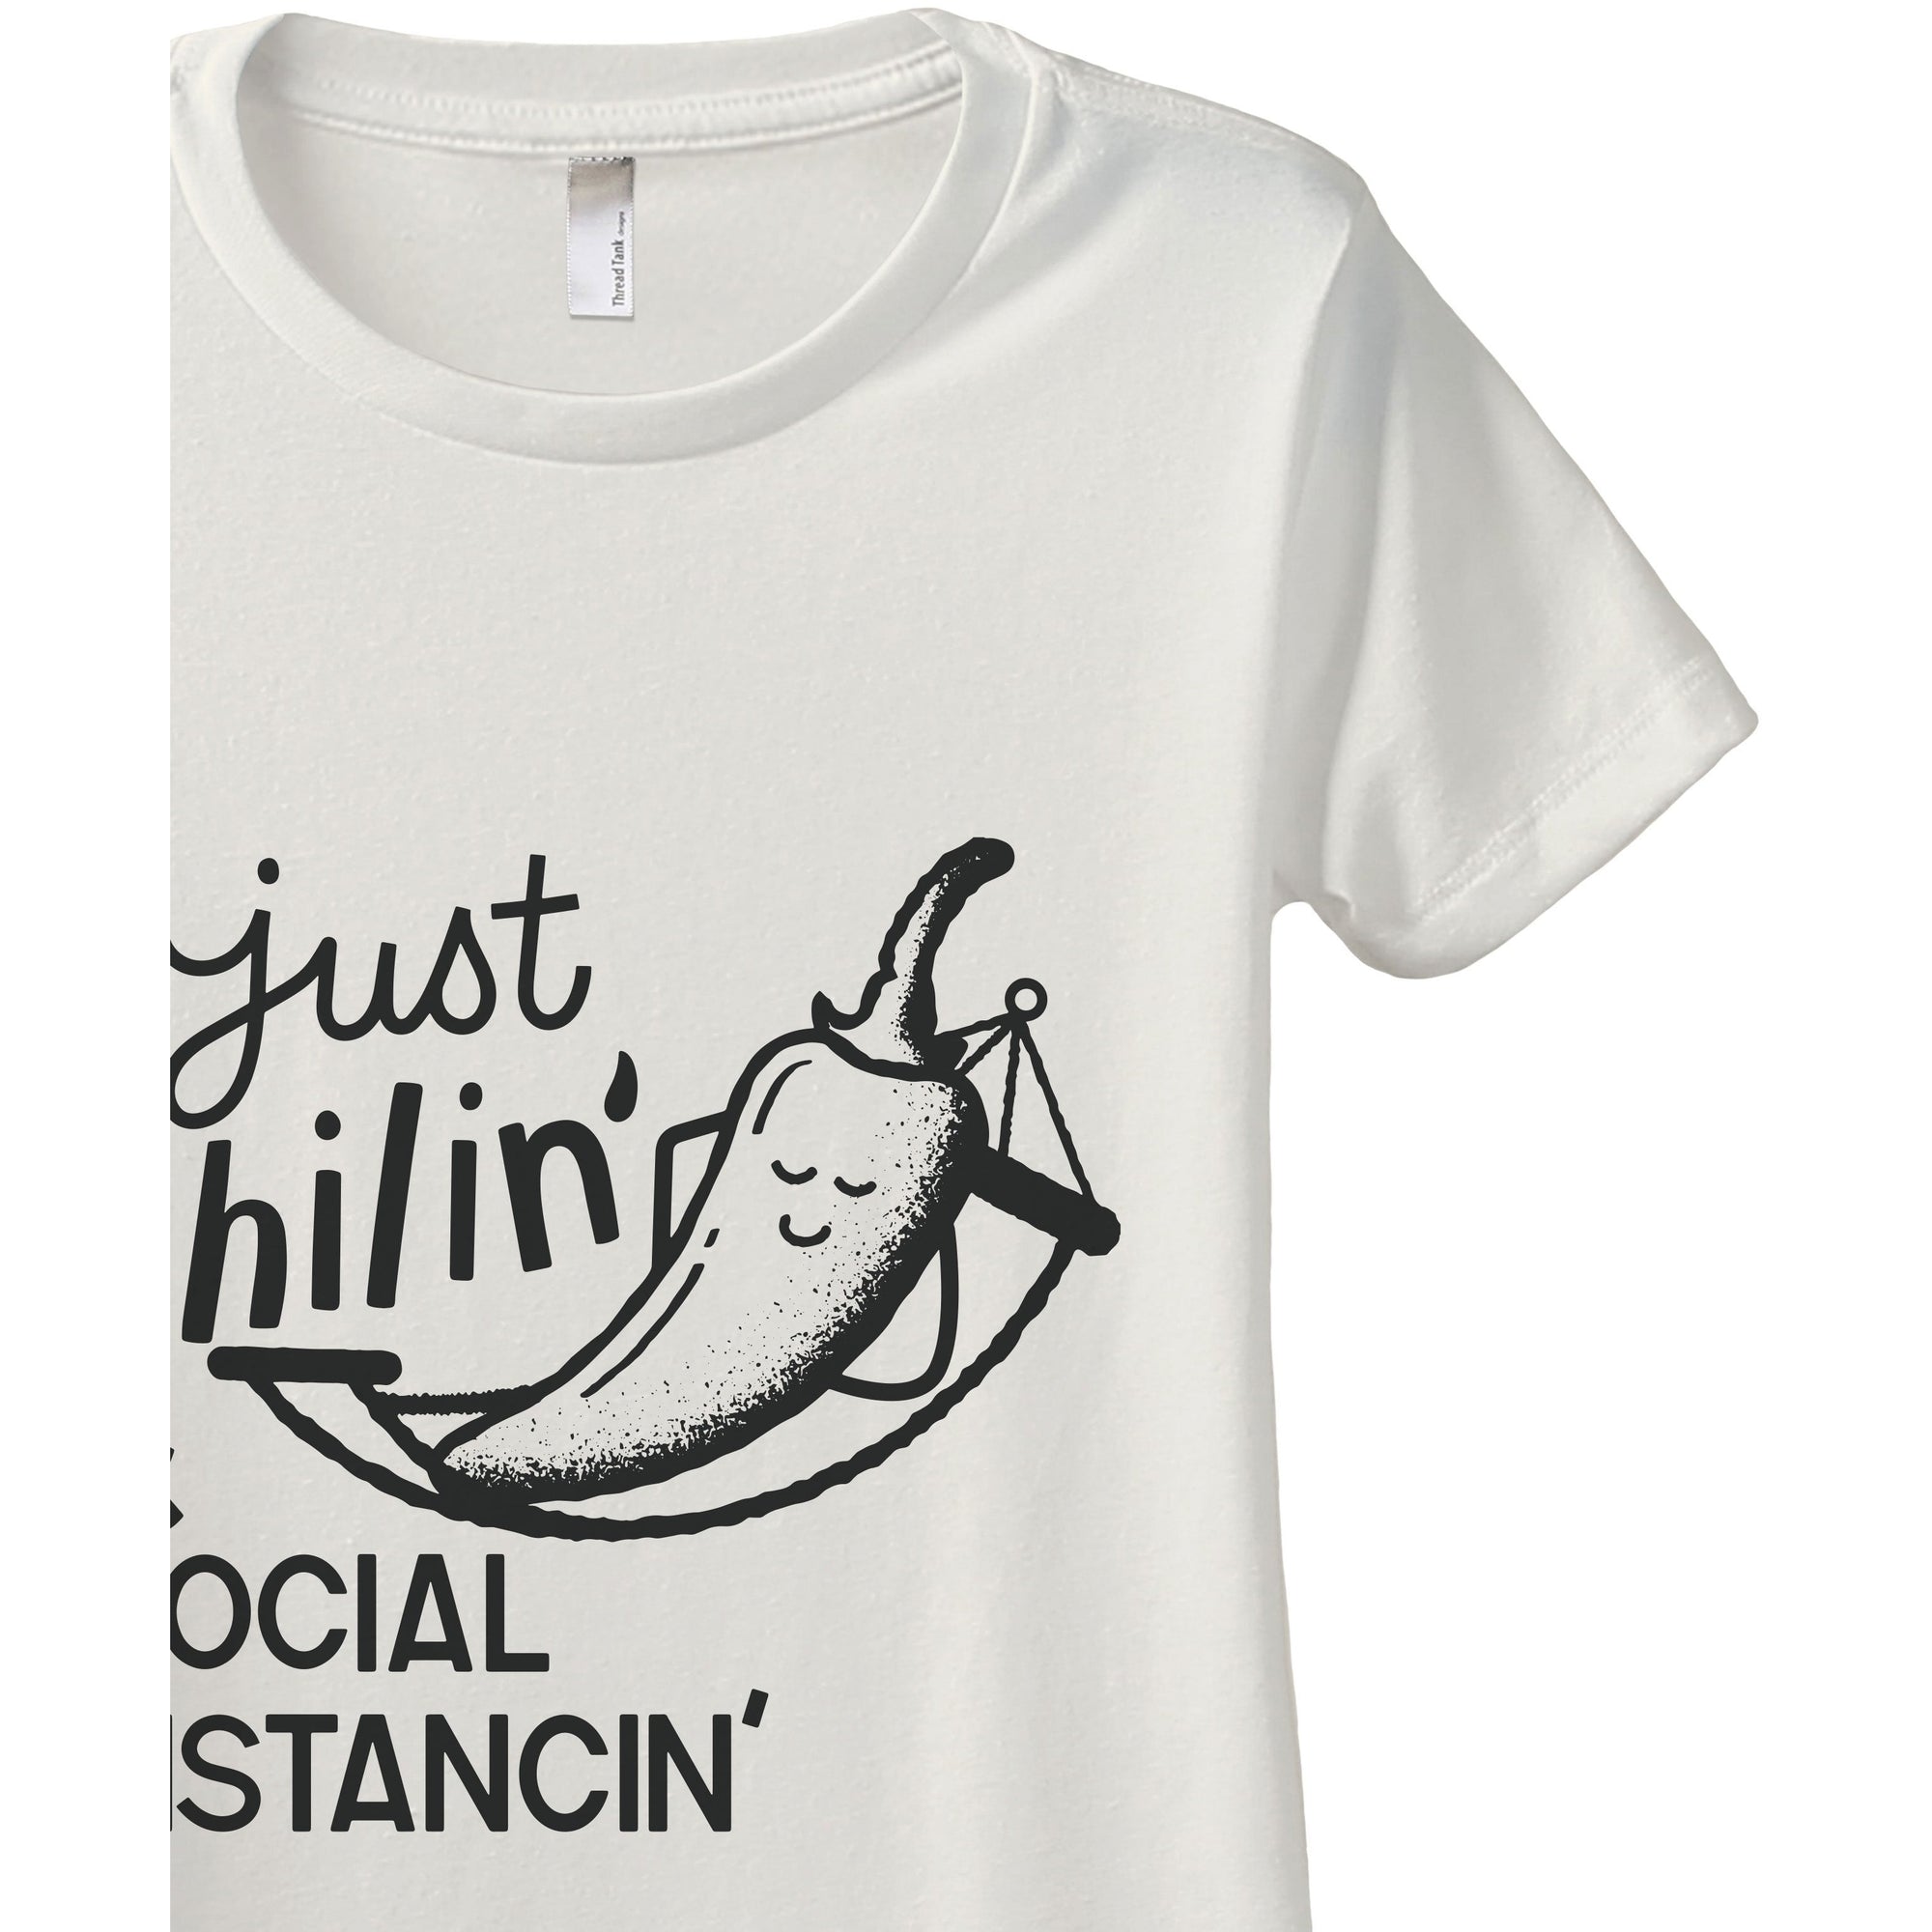 Just Chilin' And Social Distancin' - Stories You Can Wear by Thread Tank